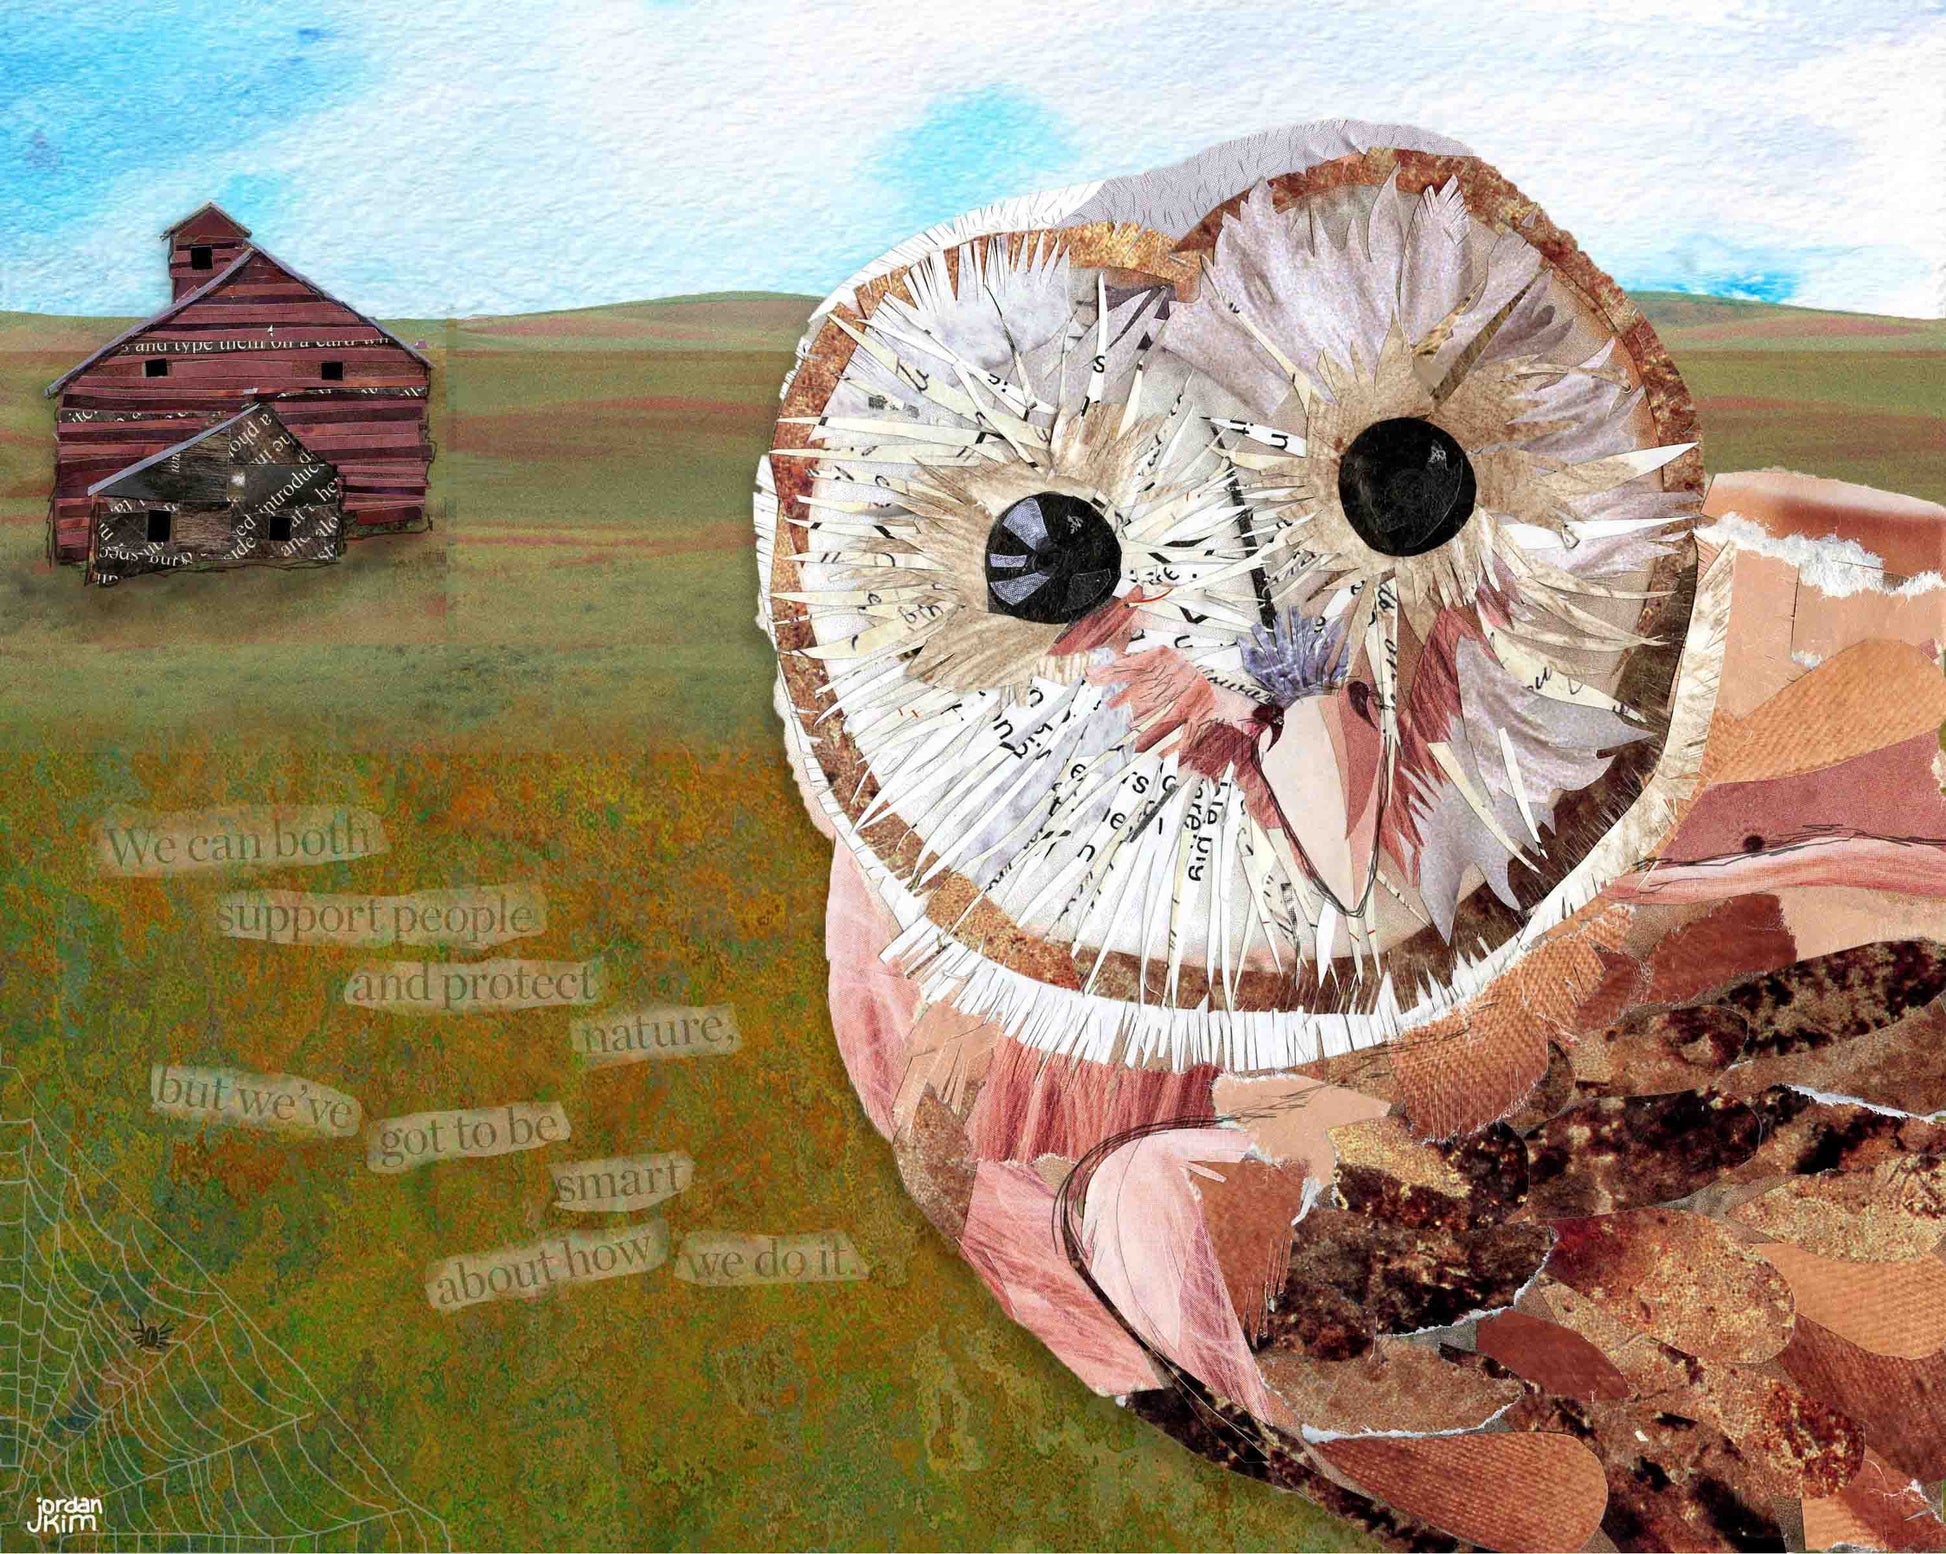 8x10 Art Print of a Barn Owl and Inspirational Text - Inspiring - Nature Lover - Conservation - Animal Lover Gift - Wall Art